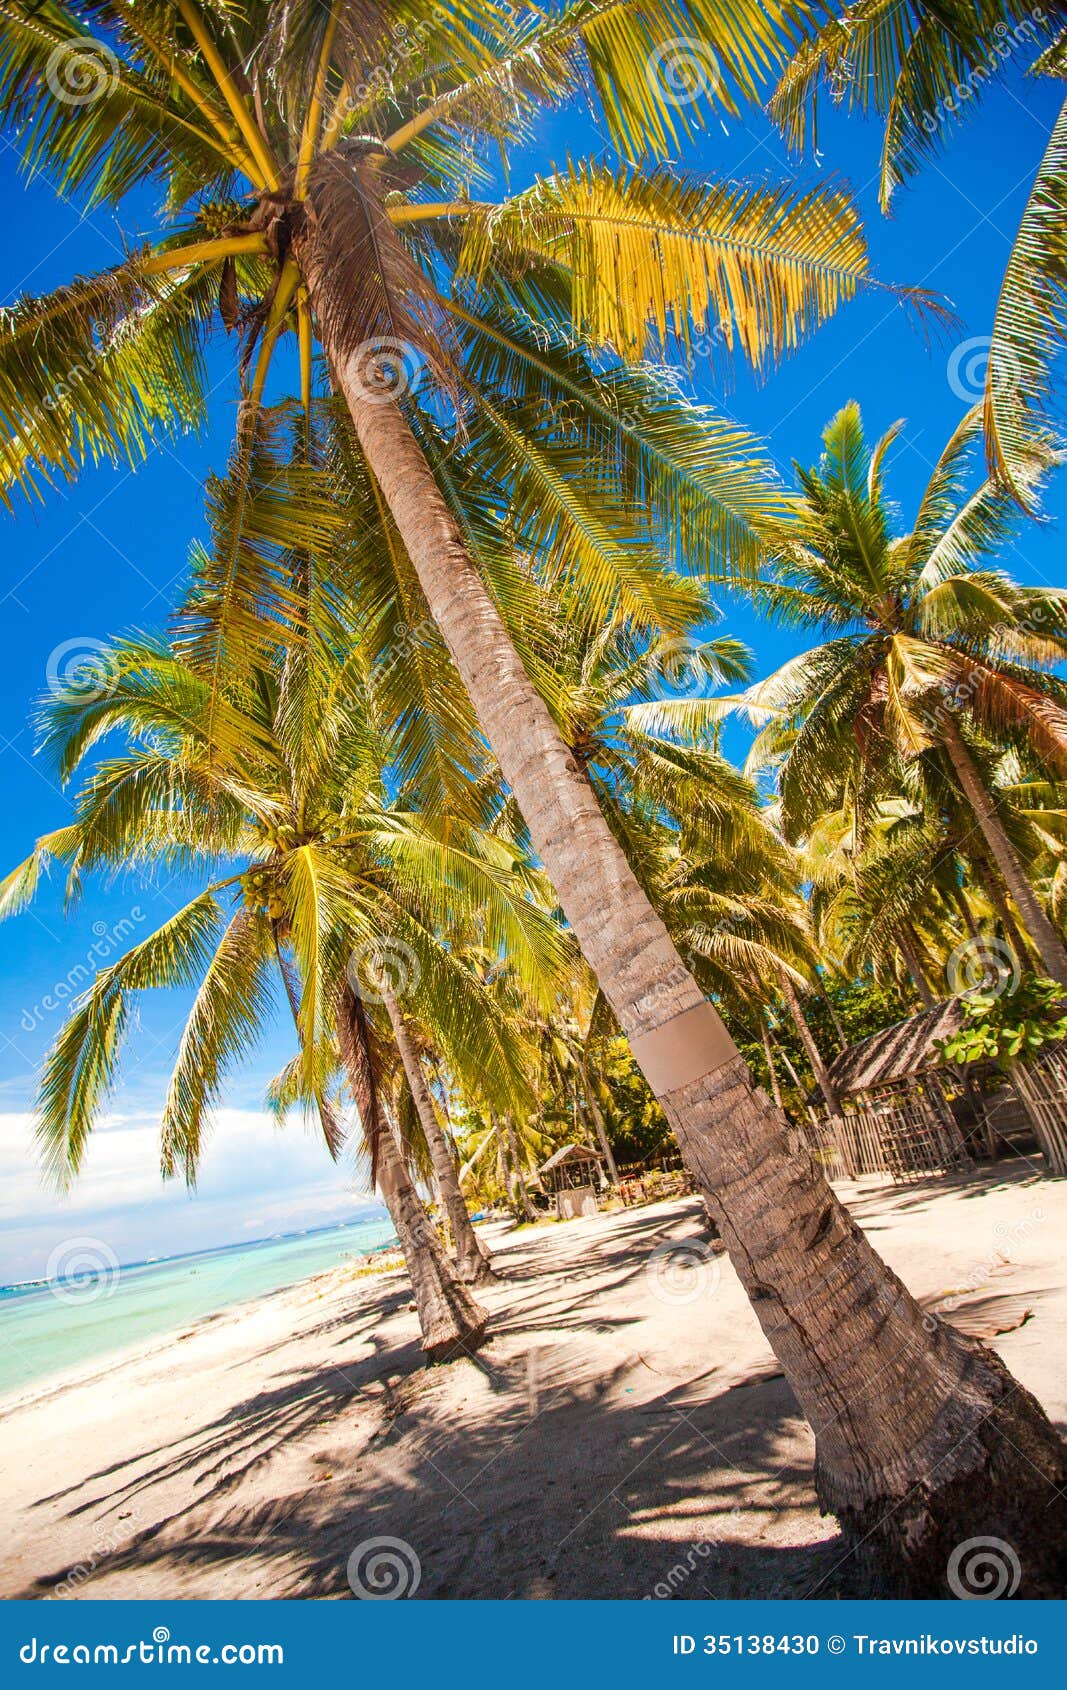 Tropical Beach with Beautiful Palms and White Sand Stock Photo - Image ...